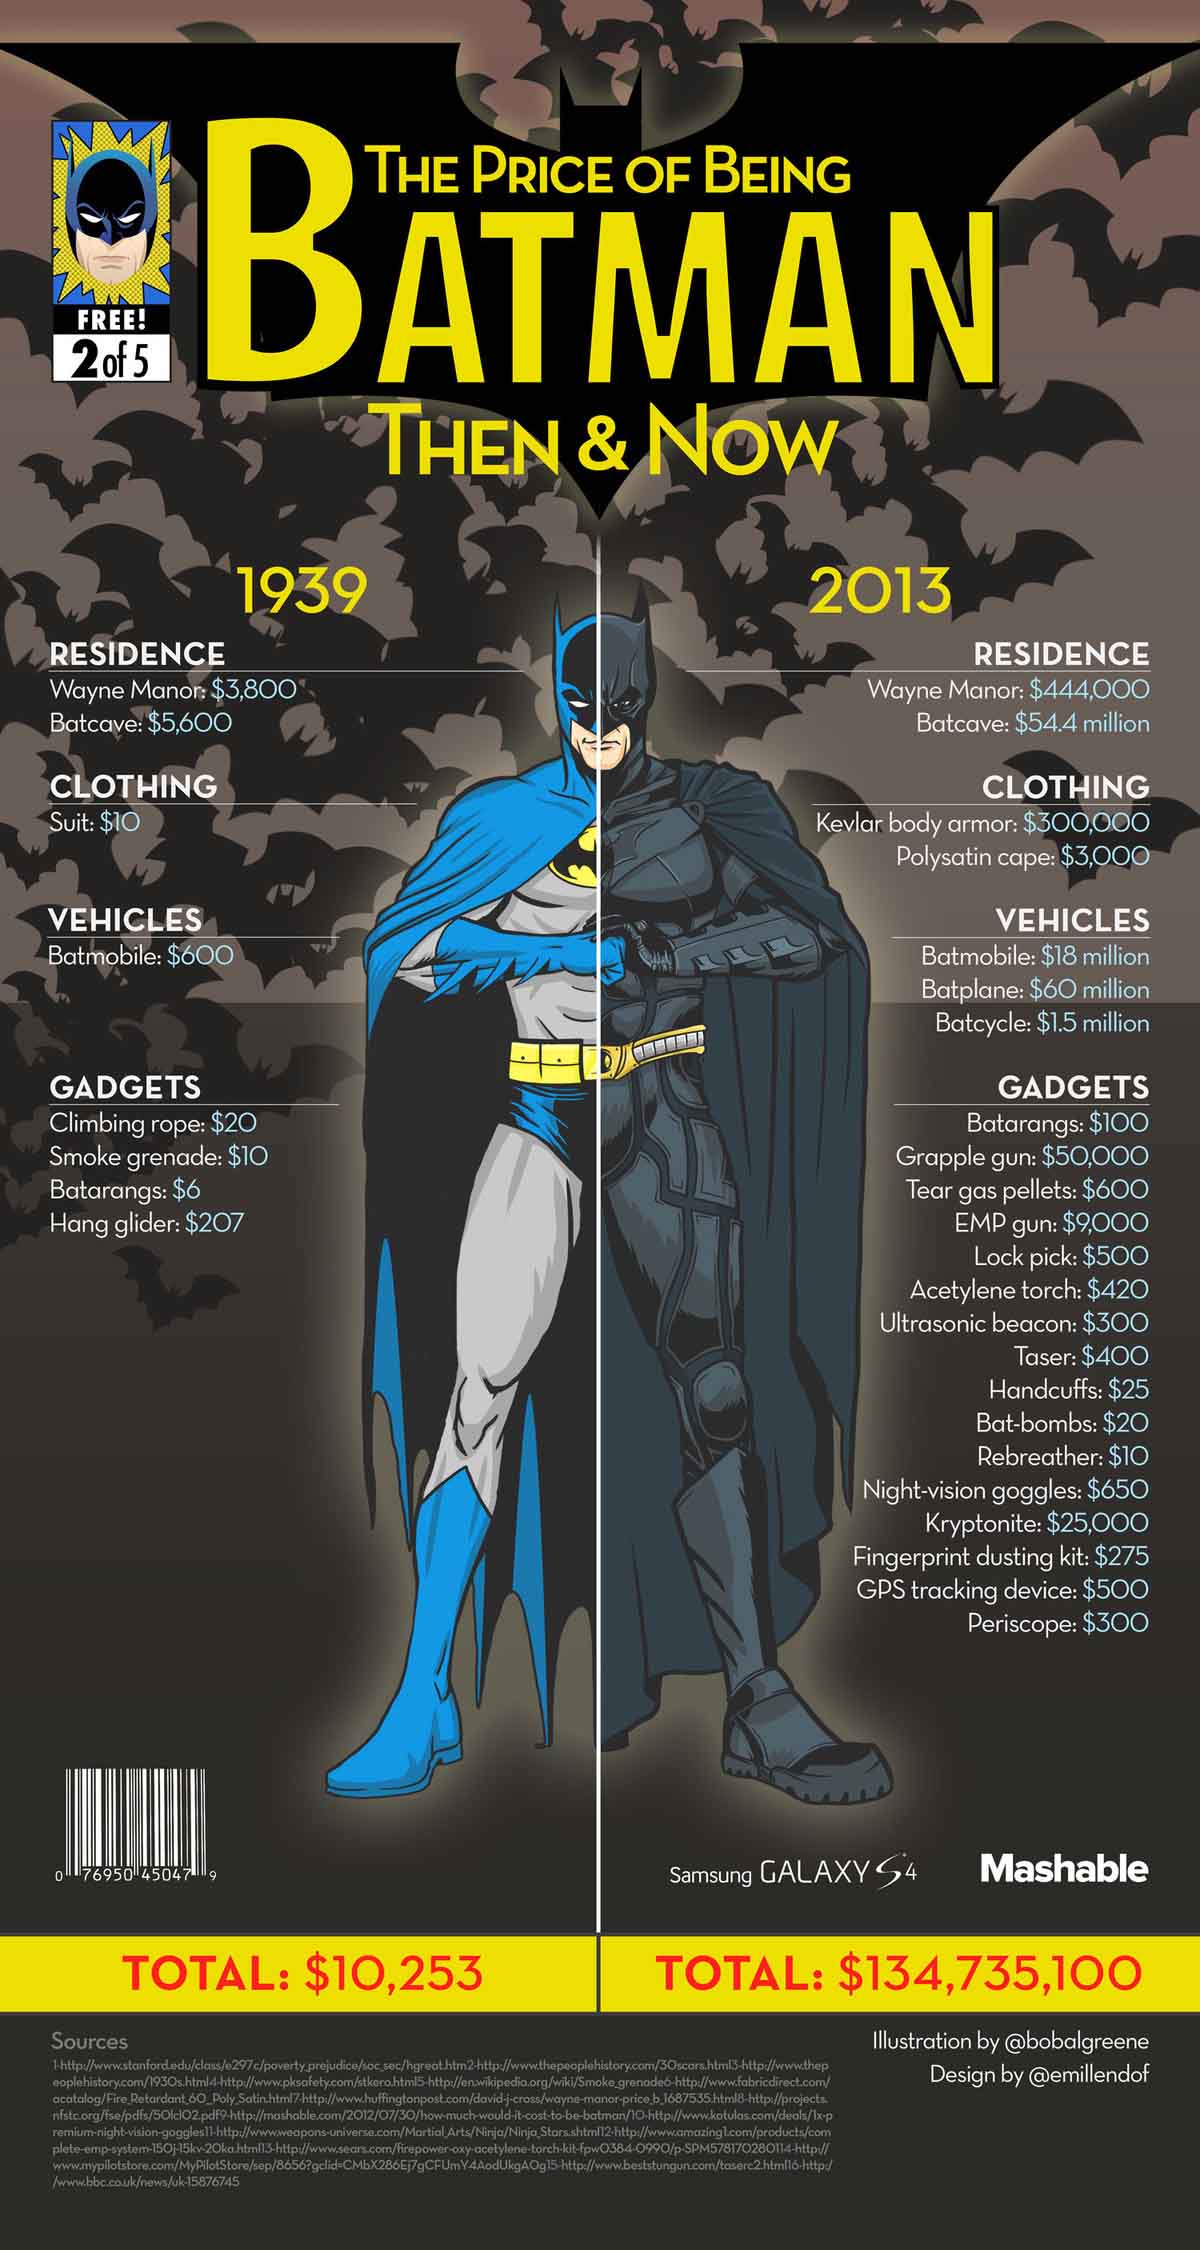 The price of being Batman